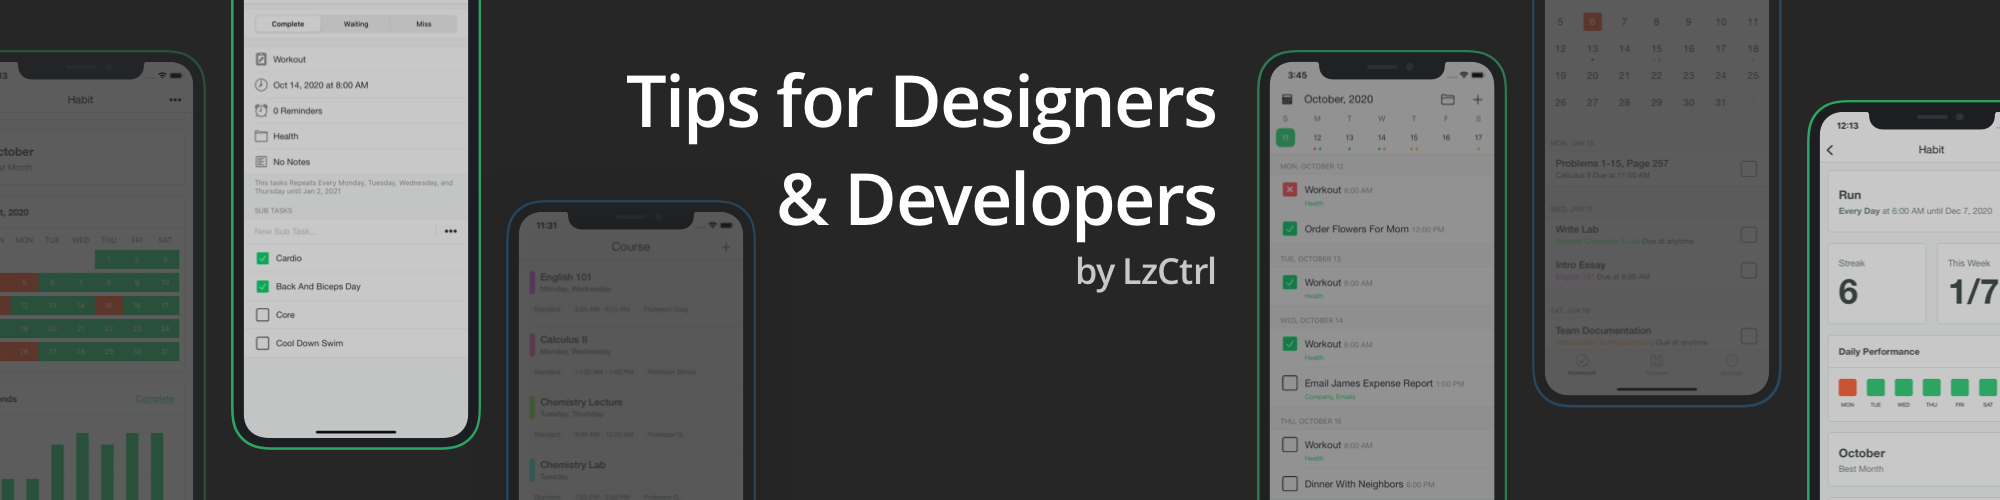 Tips for Designers and Developers